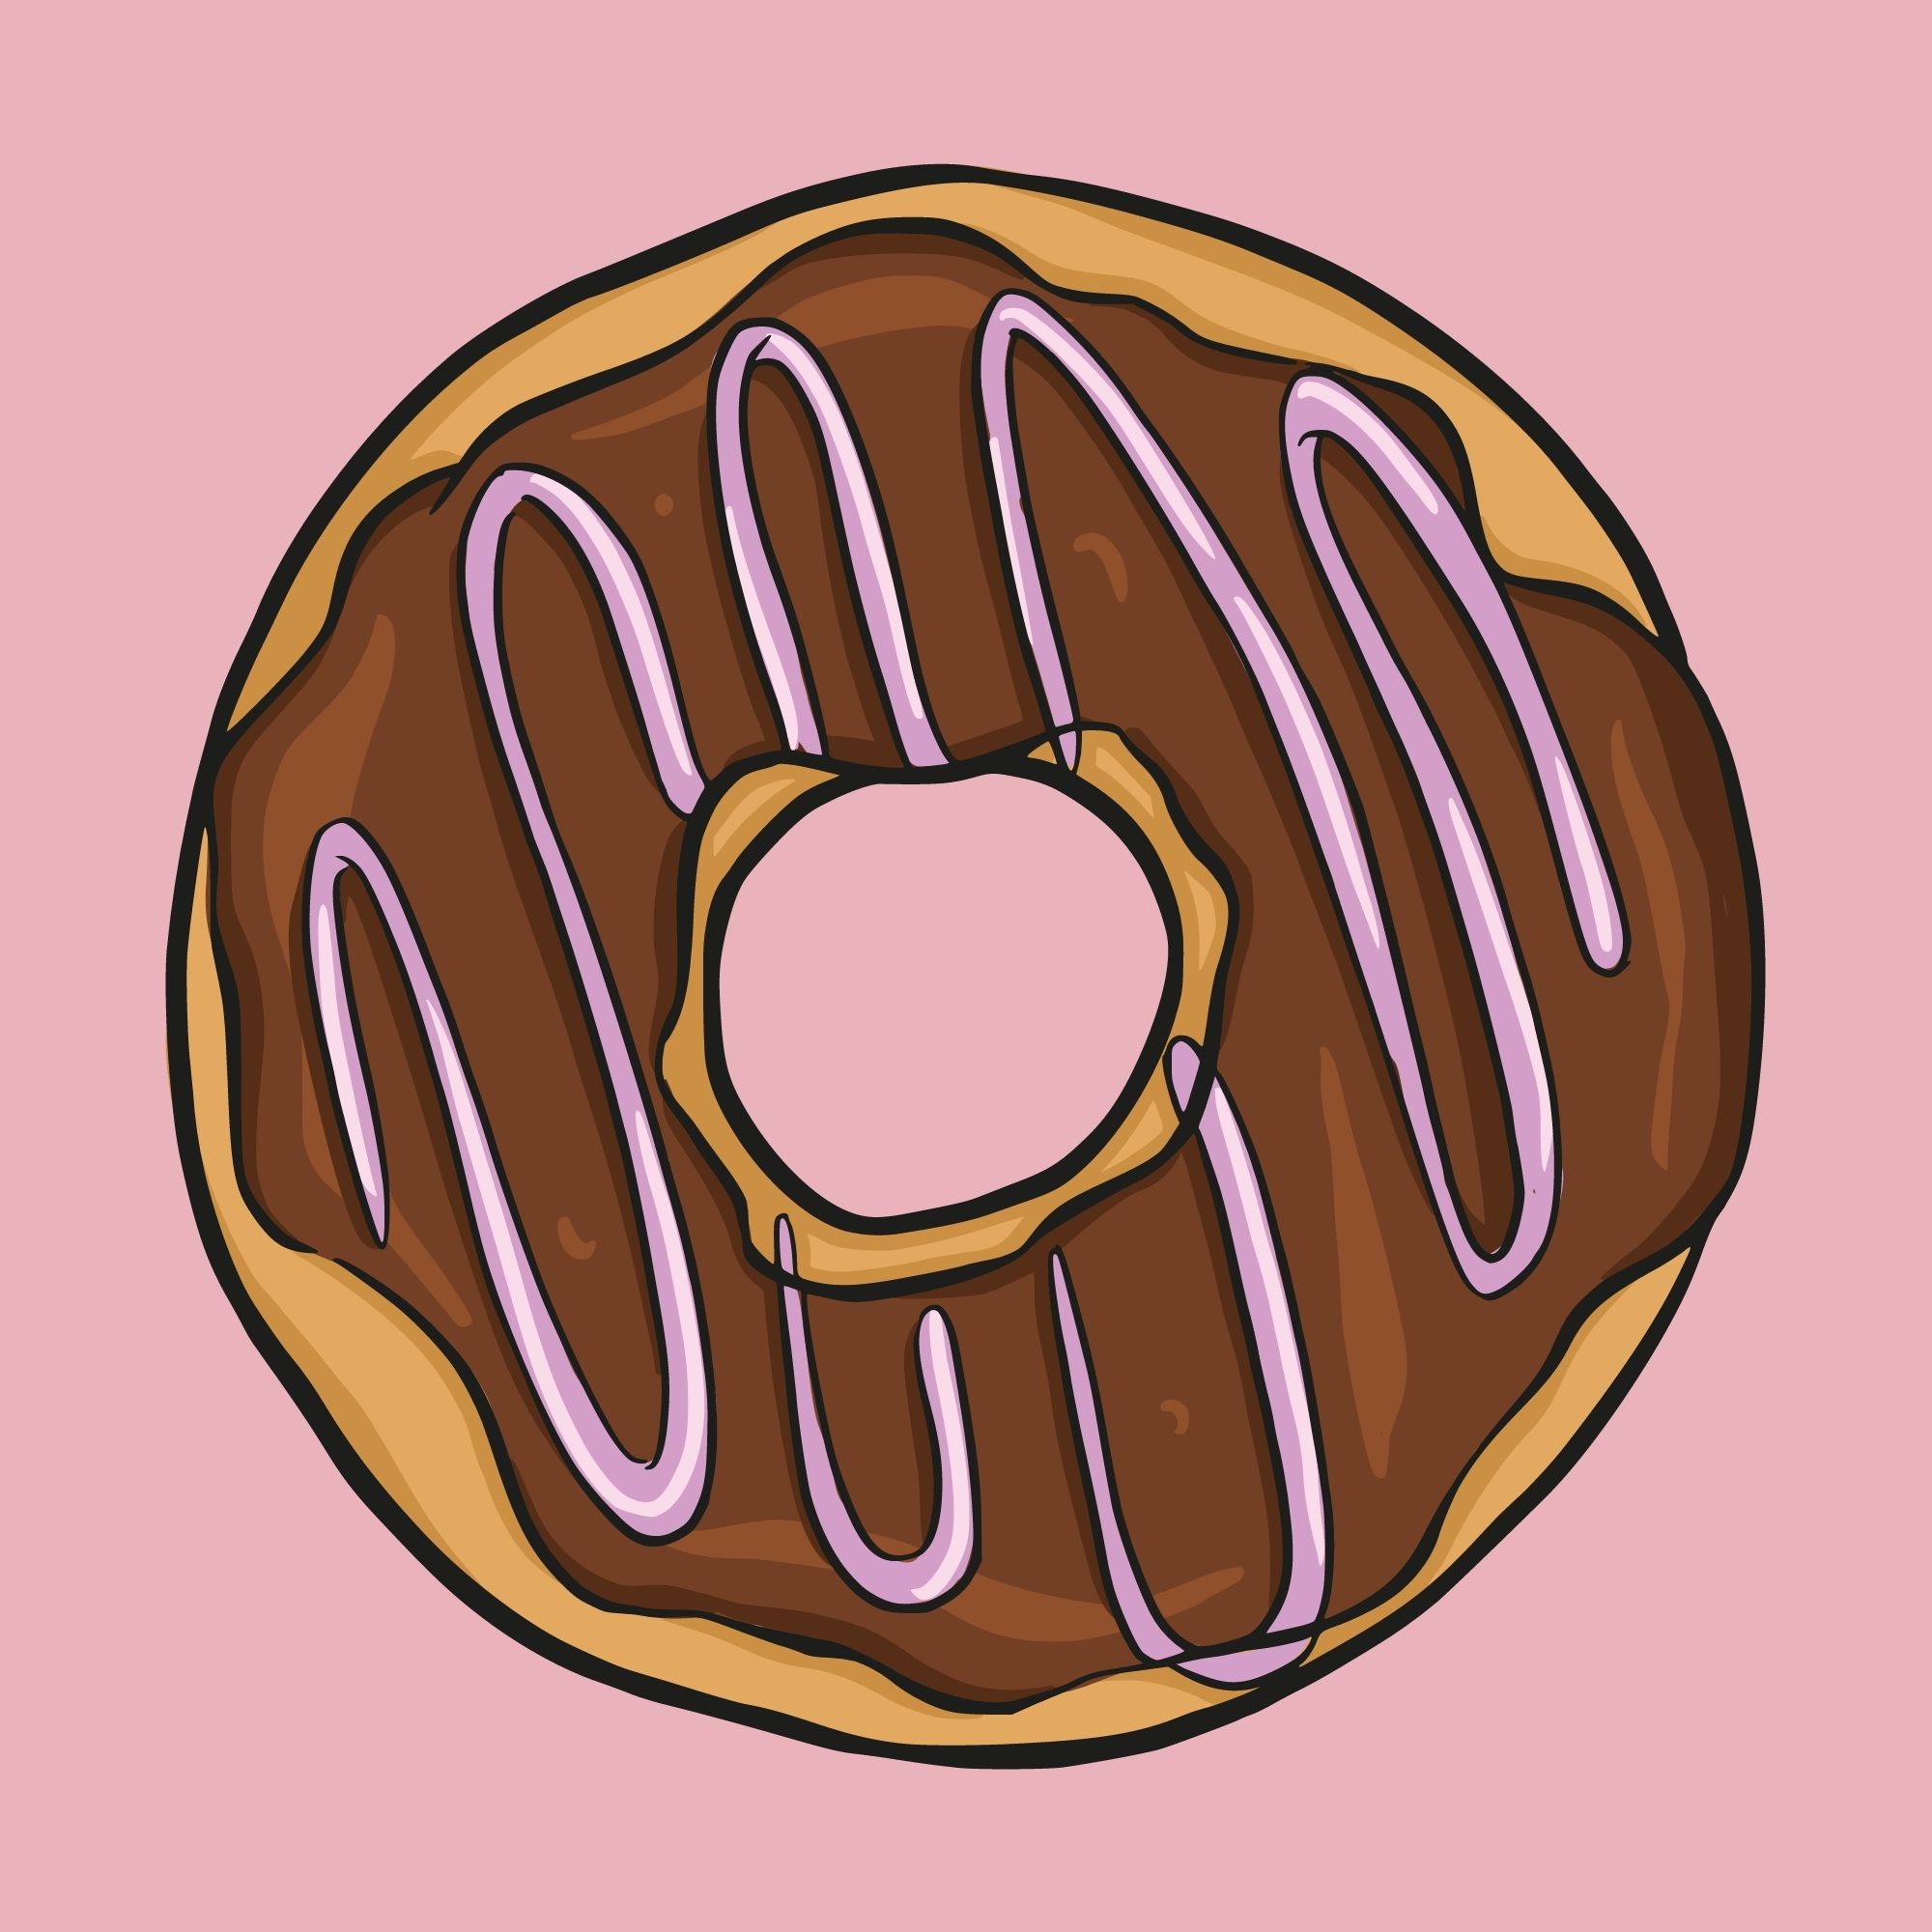 Donut #37 - Poly Donuts | OpenSea